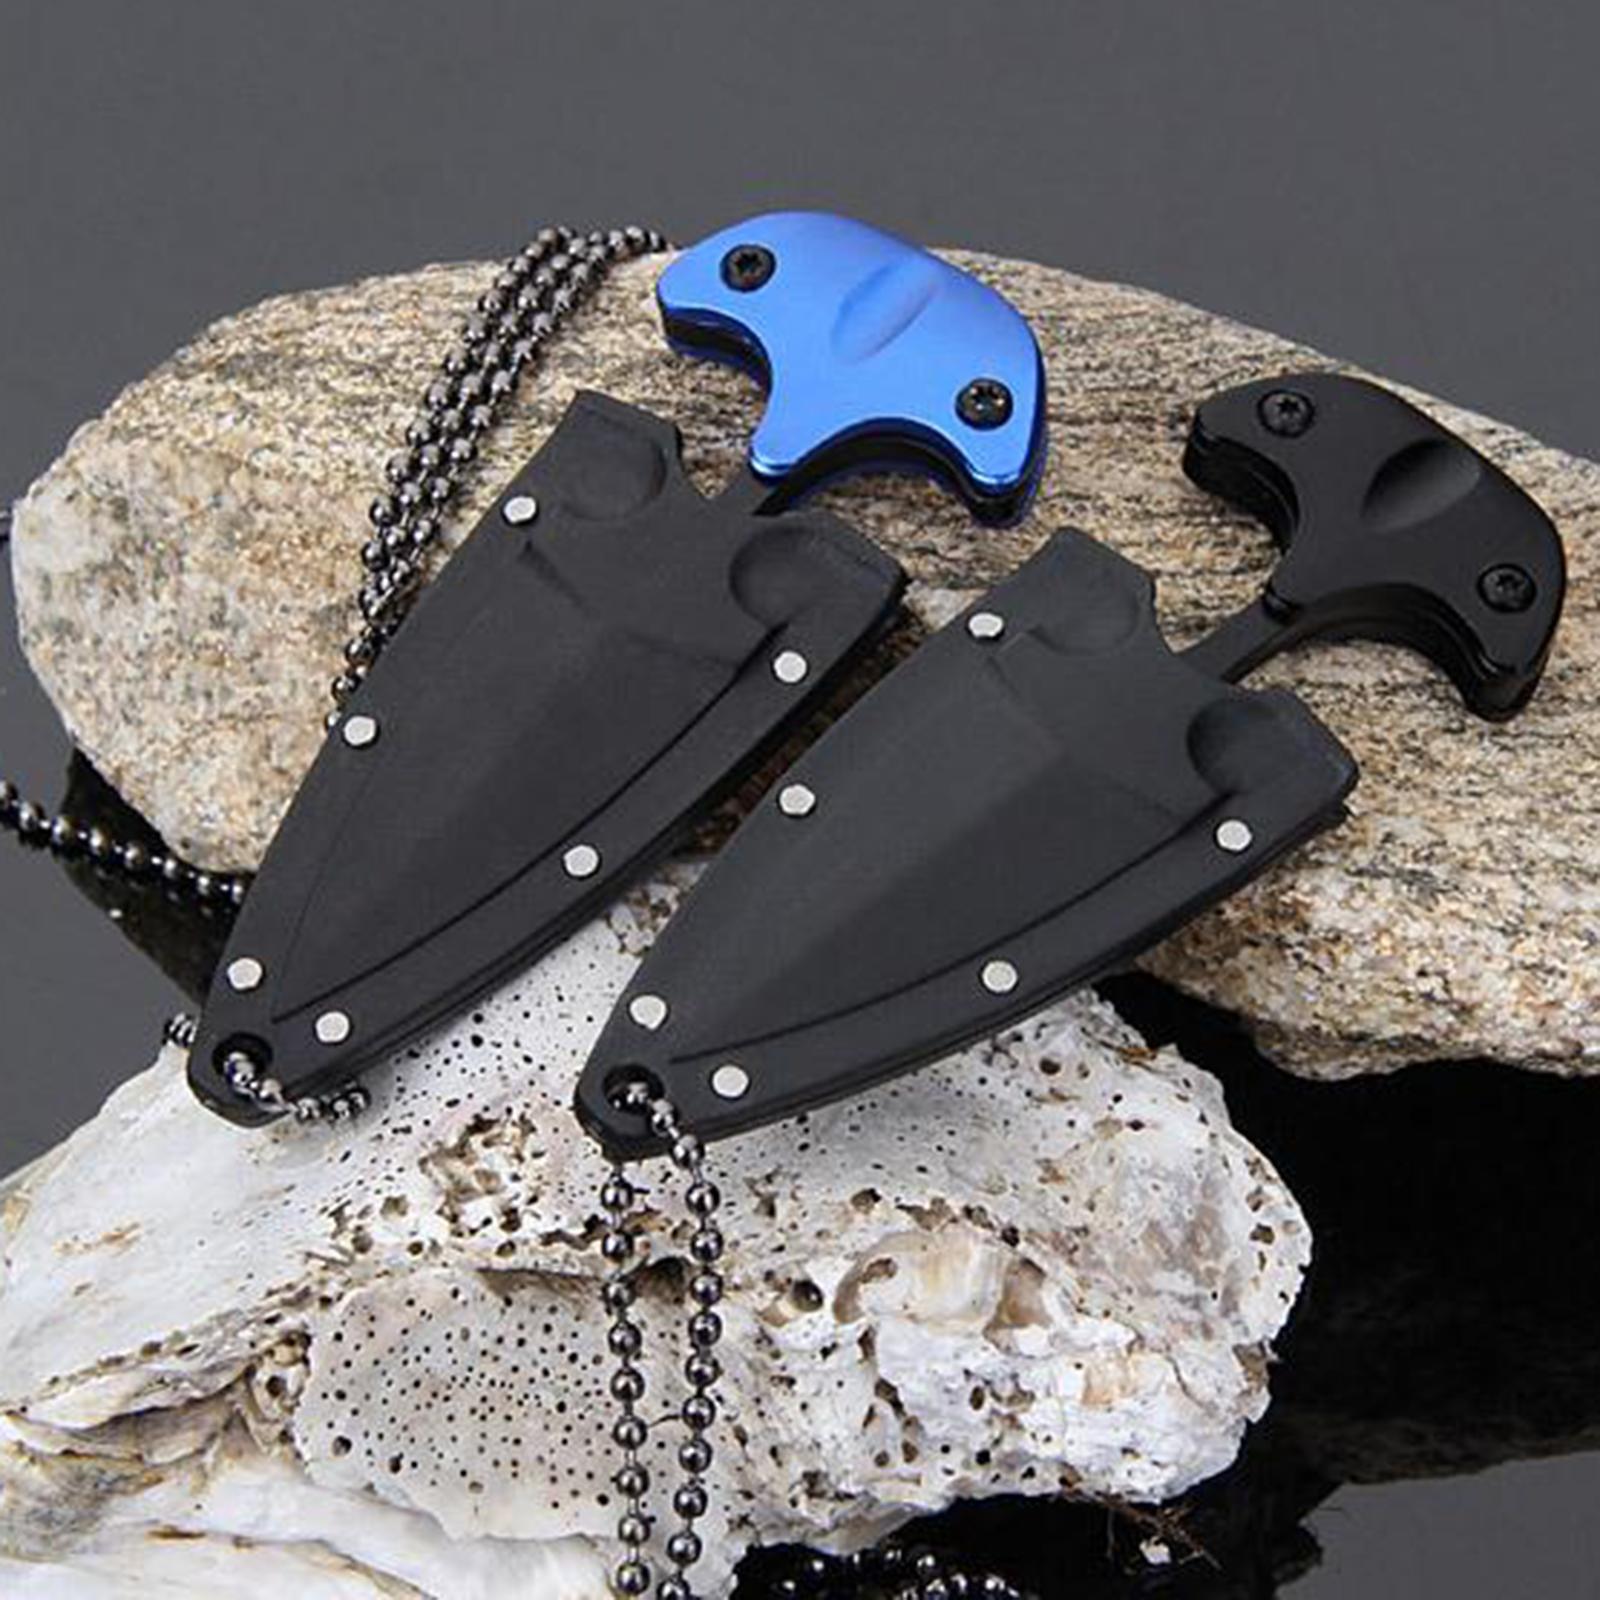 Mini Portable Durable Camping Knife Tea Knives with Chain for Outdoor Camp Black